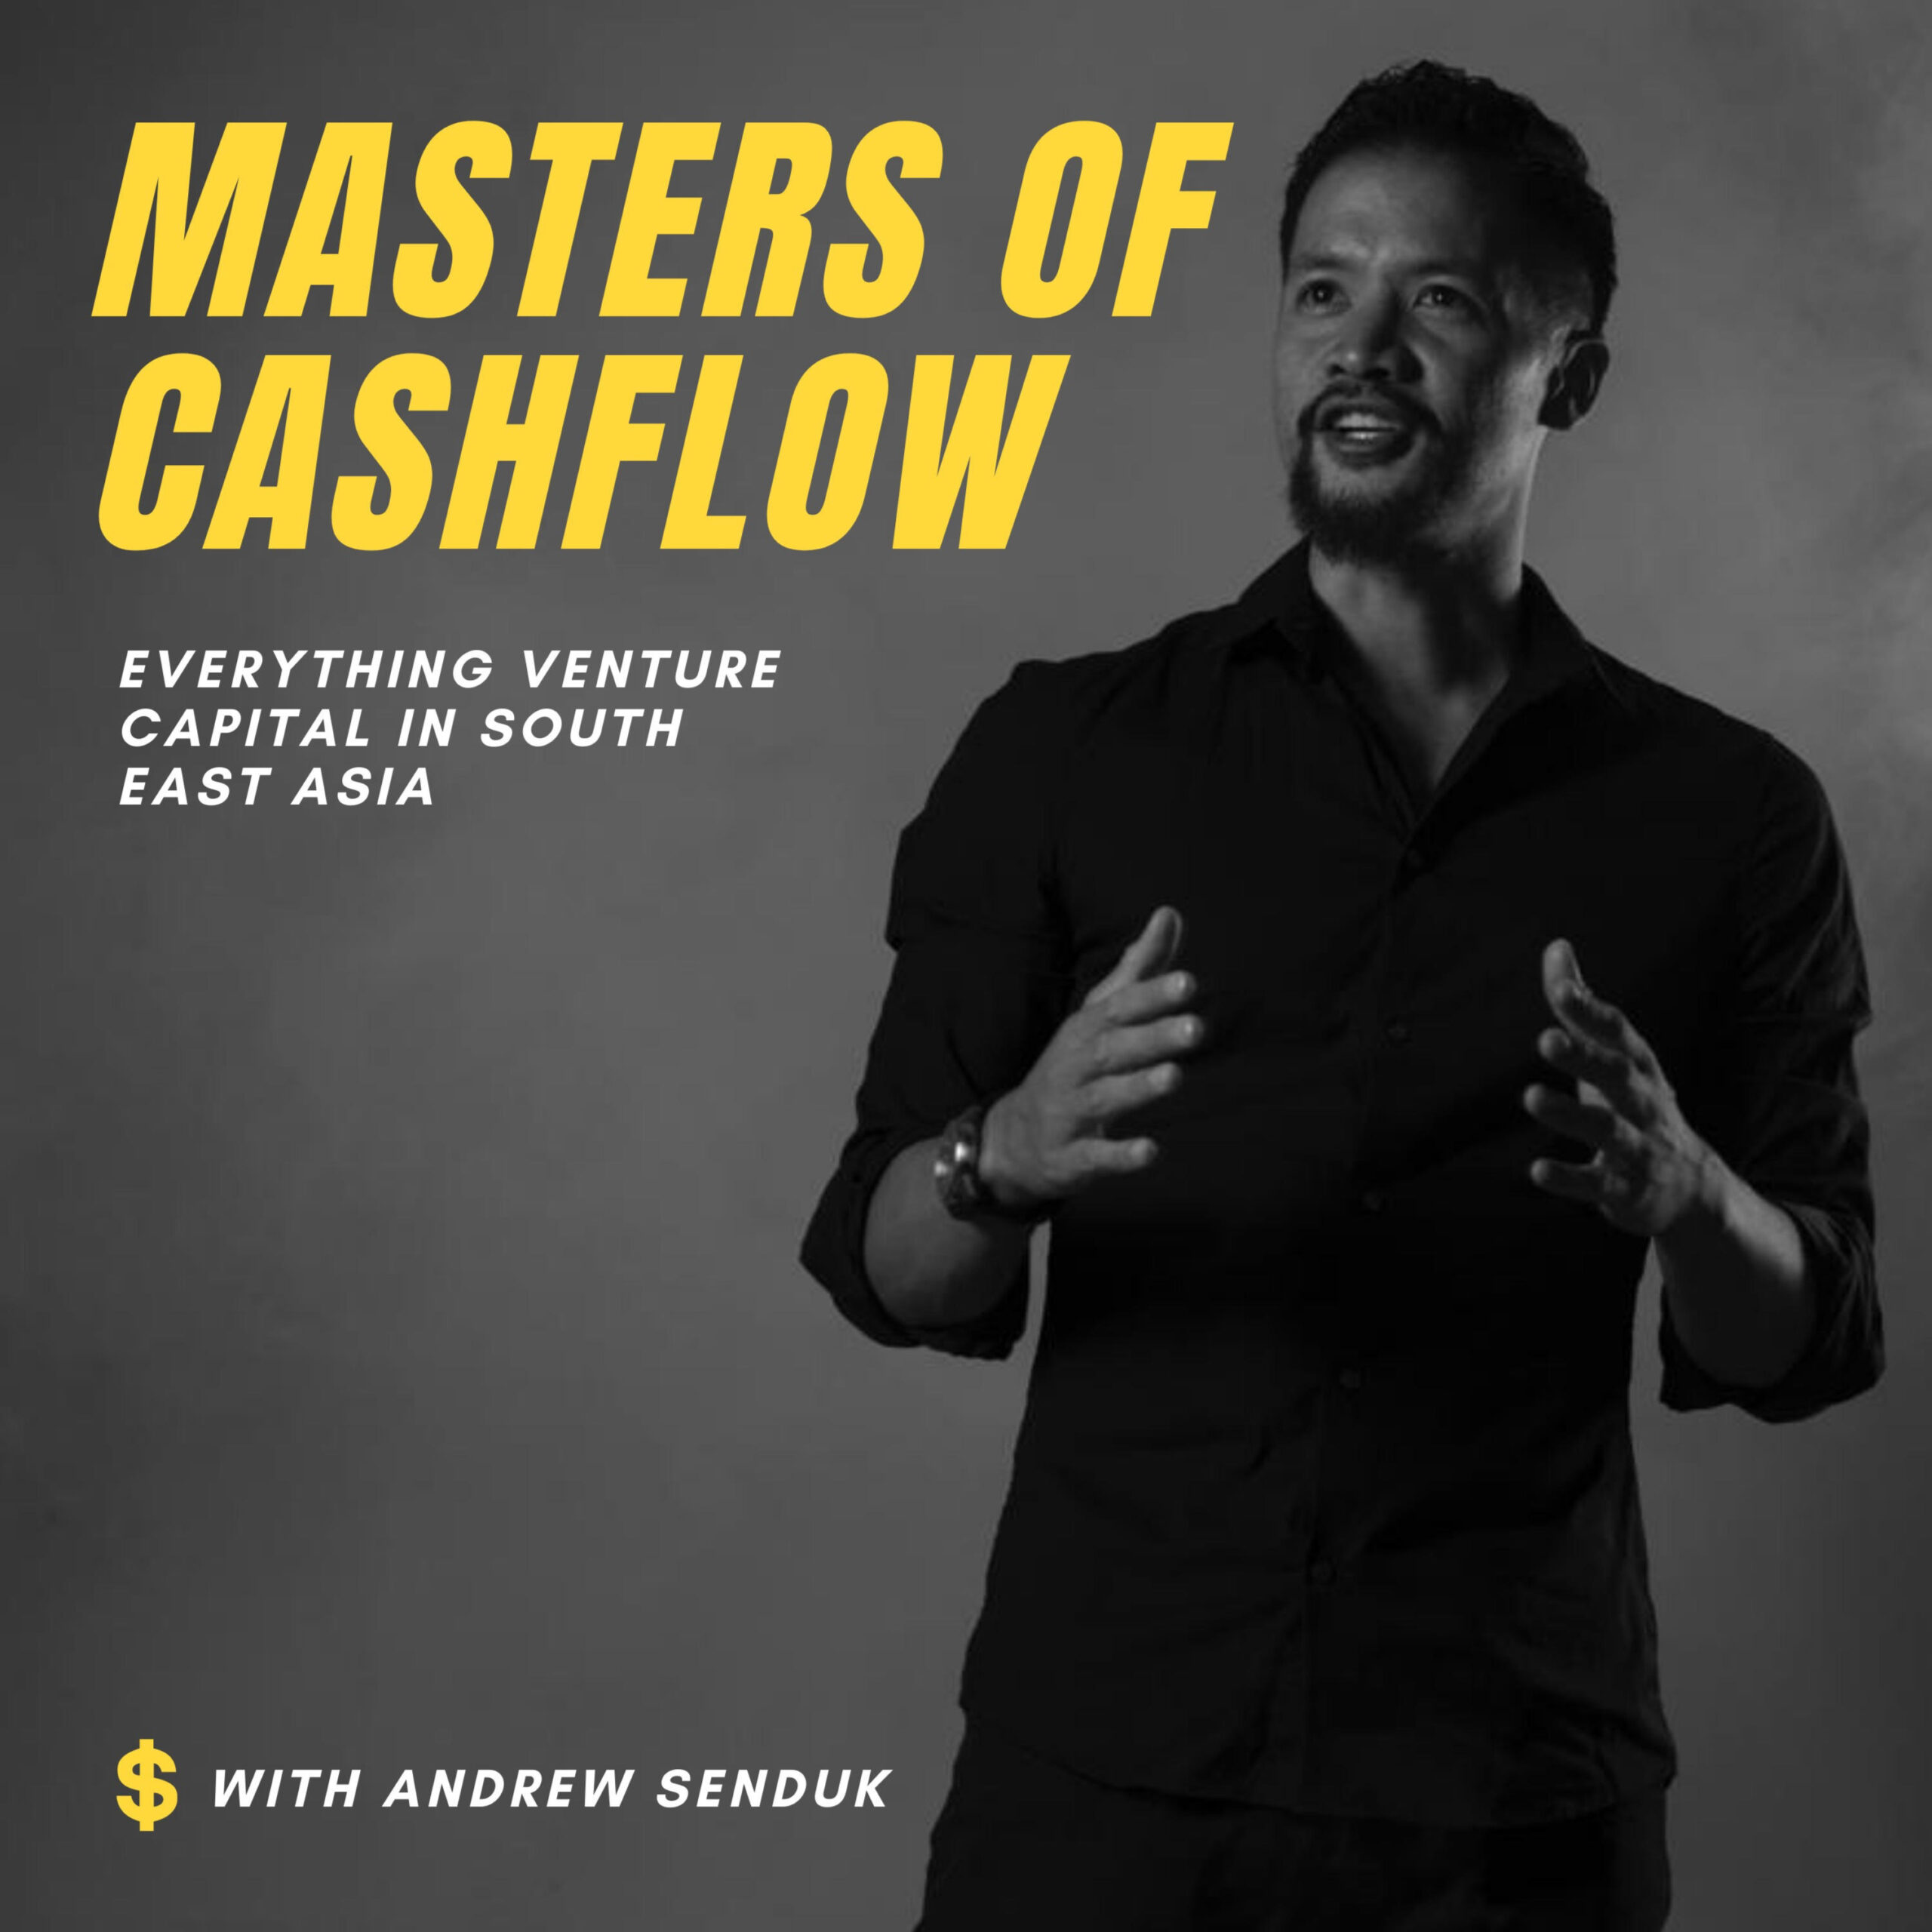 The Masters of Cashflow podcast